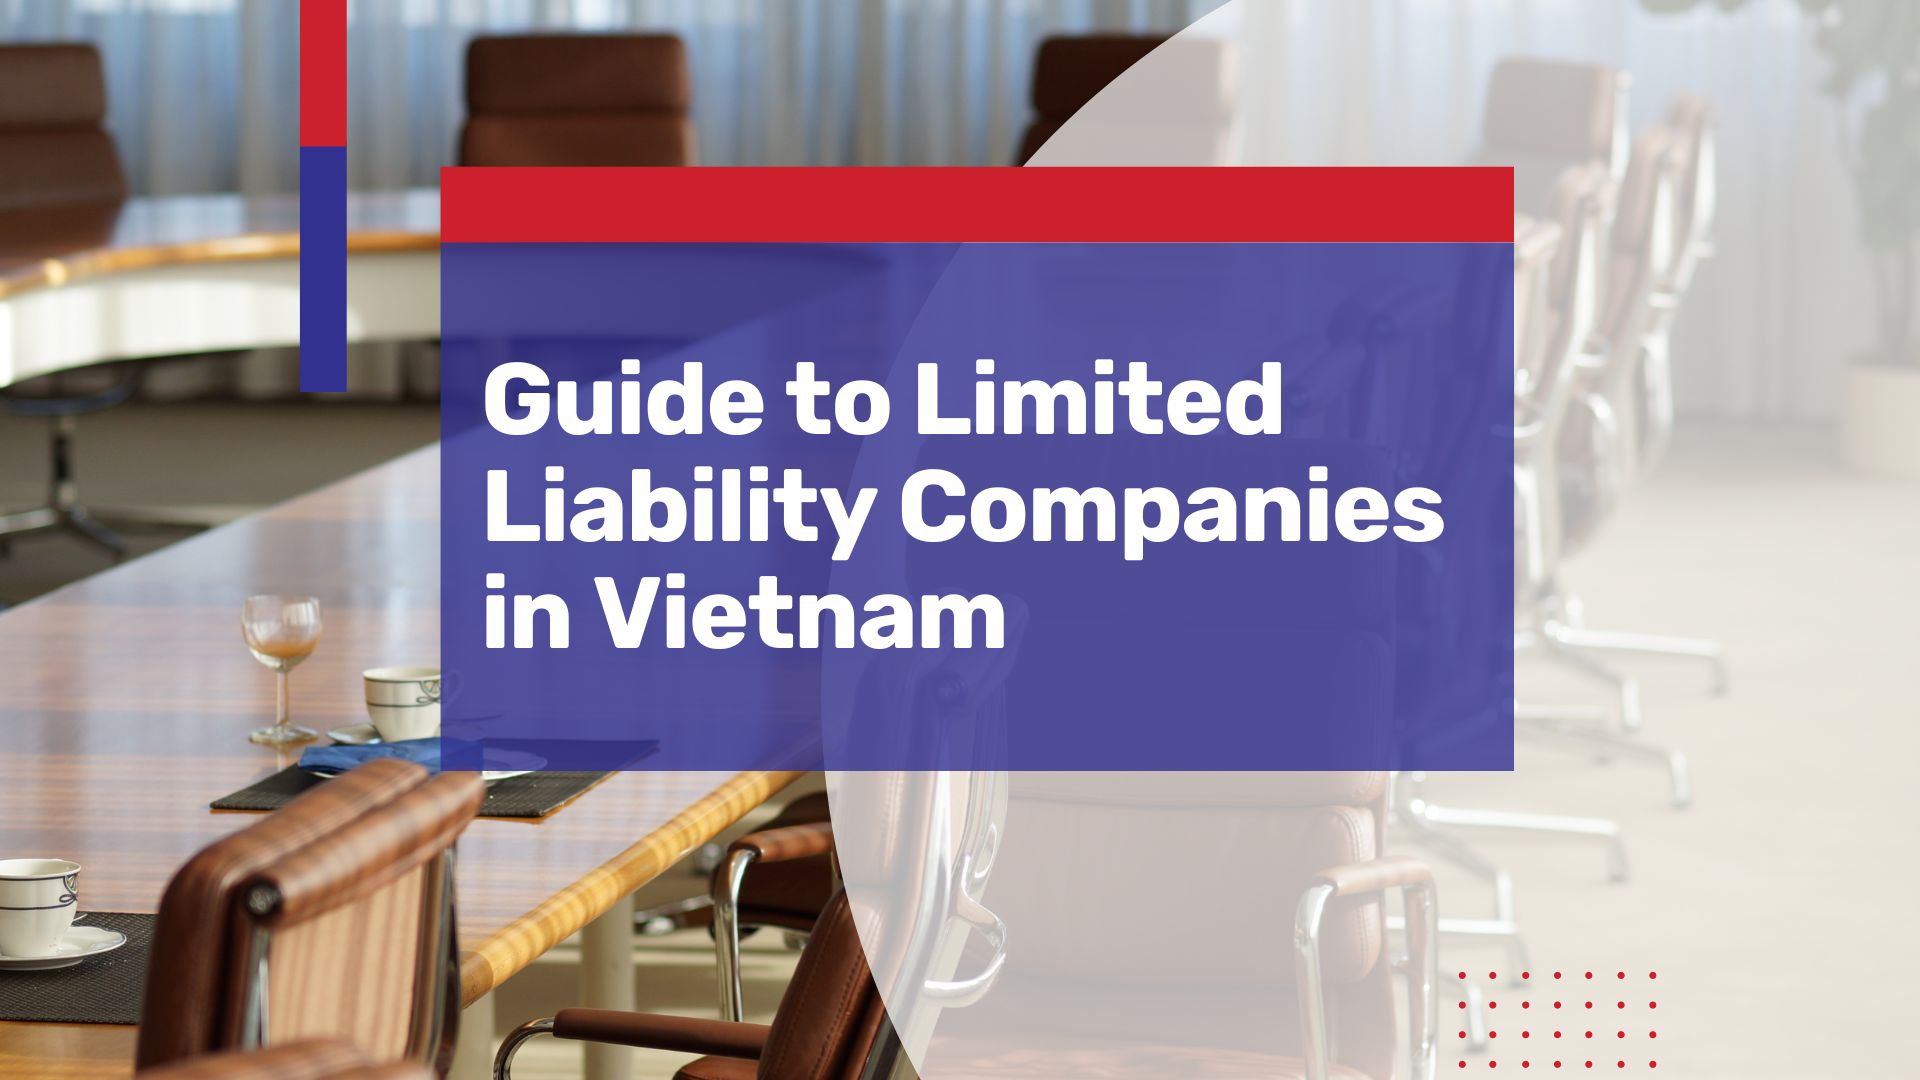 Starting and Operating a Limited Liability Company (LLC) in Vietnam: The Last Guide You’ll Ever Need